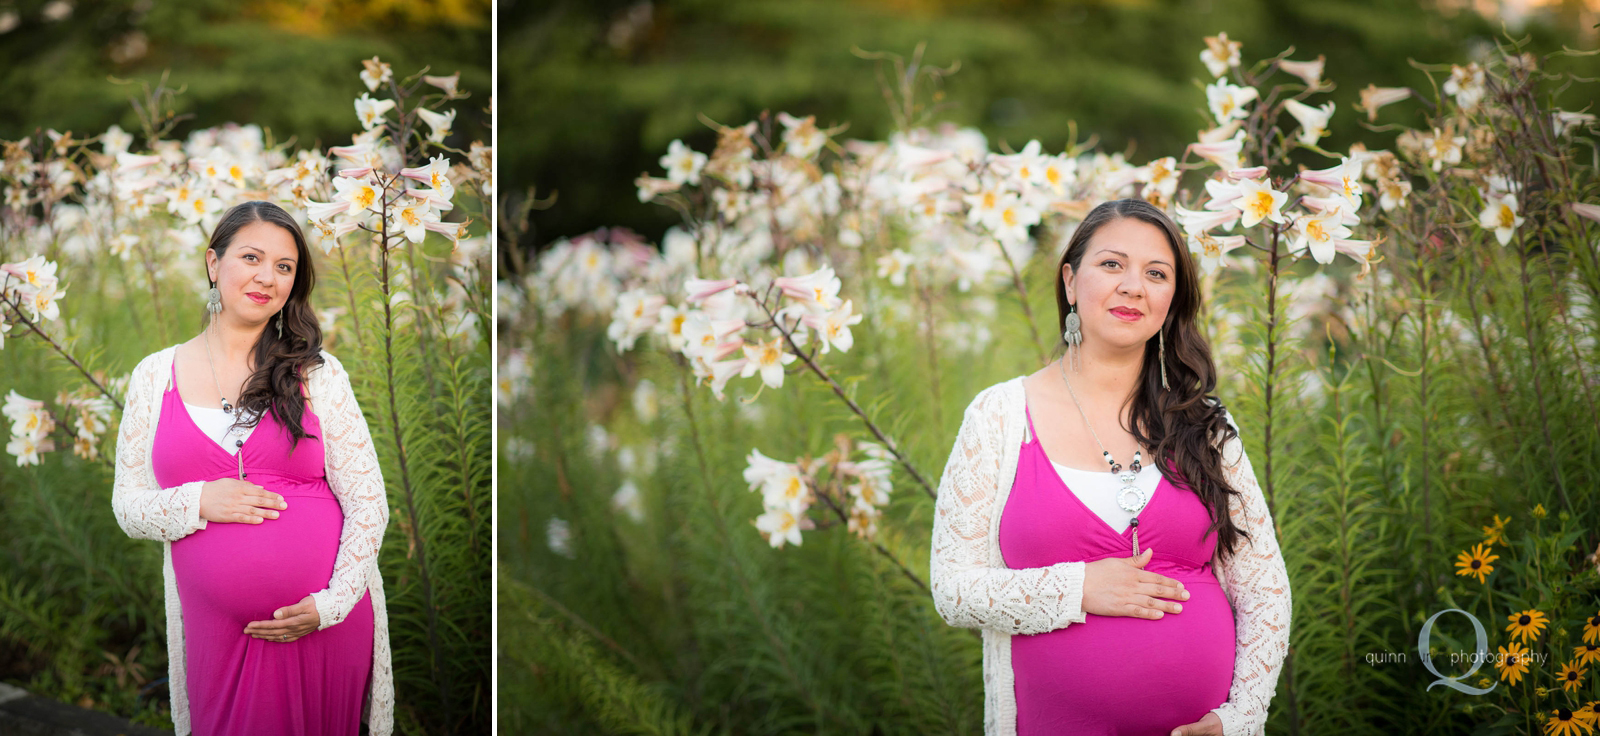 baby bump in front of flowers